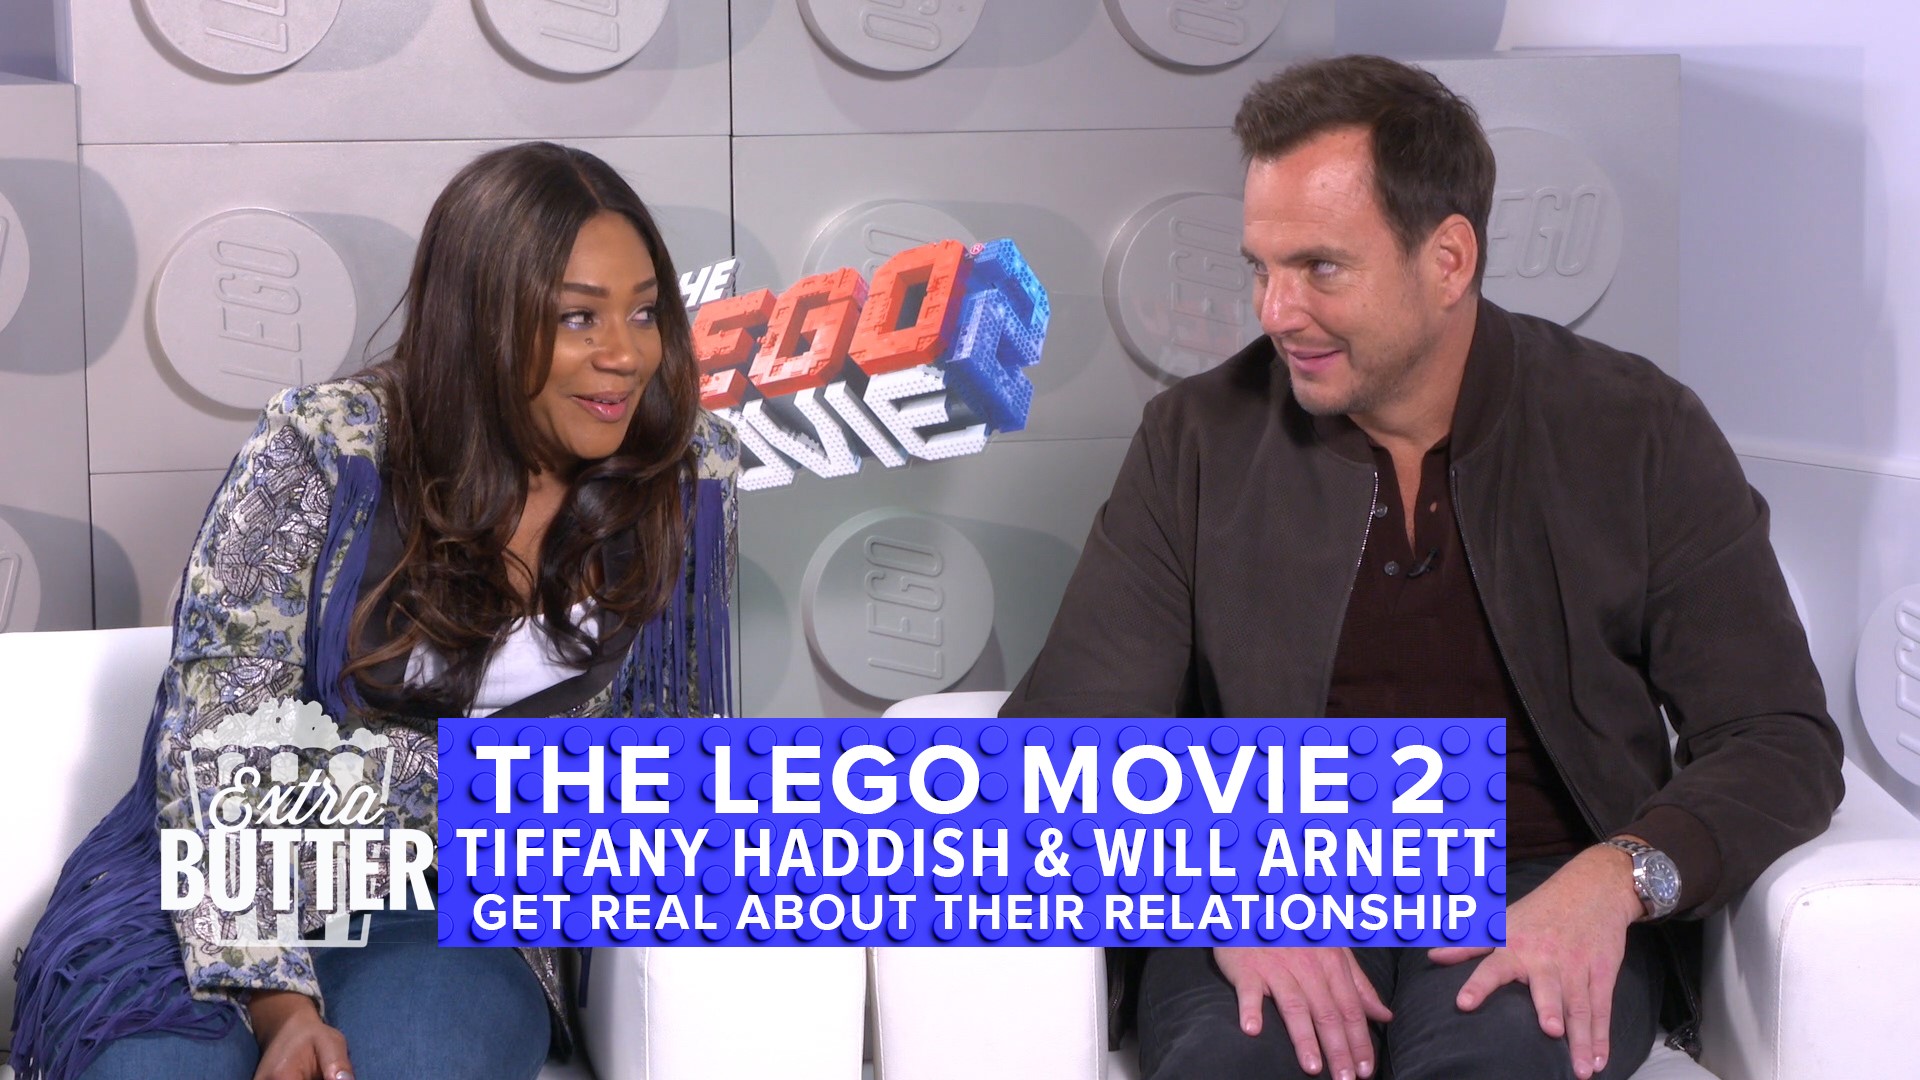 Comedians Tiffany Haddish and Will Arnett give a funny interview for 'The Lego Movie 2.' The pair talk about dating, marriage, Will's kids (which Tiffany doesn't want), and Chingy. Oh, Tiffany also sings - twice, and Will tries to compliment Mark S. Allen but ends up talking about Chili's. Interview arranged by  Warner Bros. Pictures.